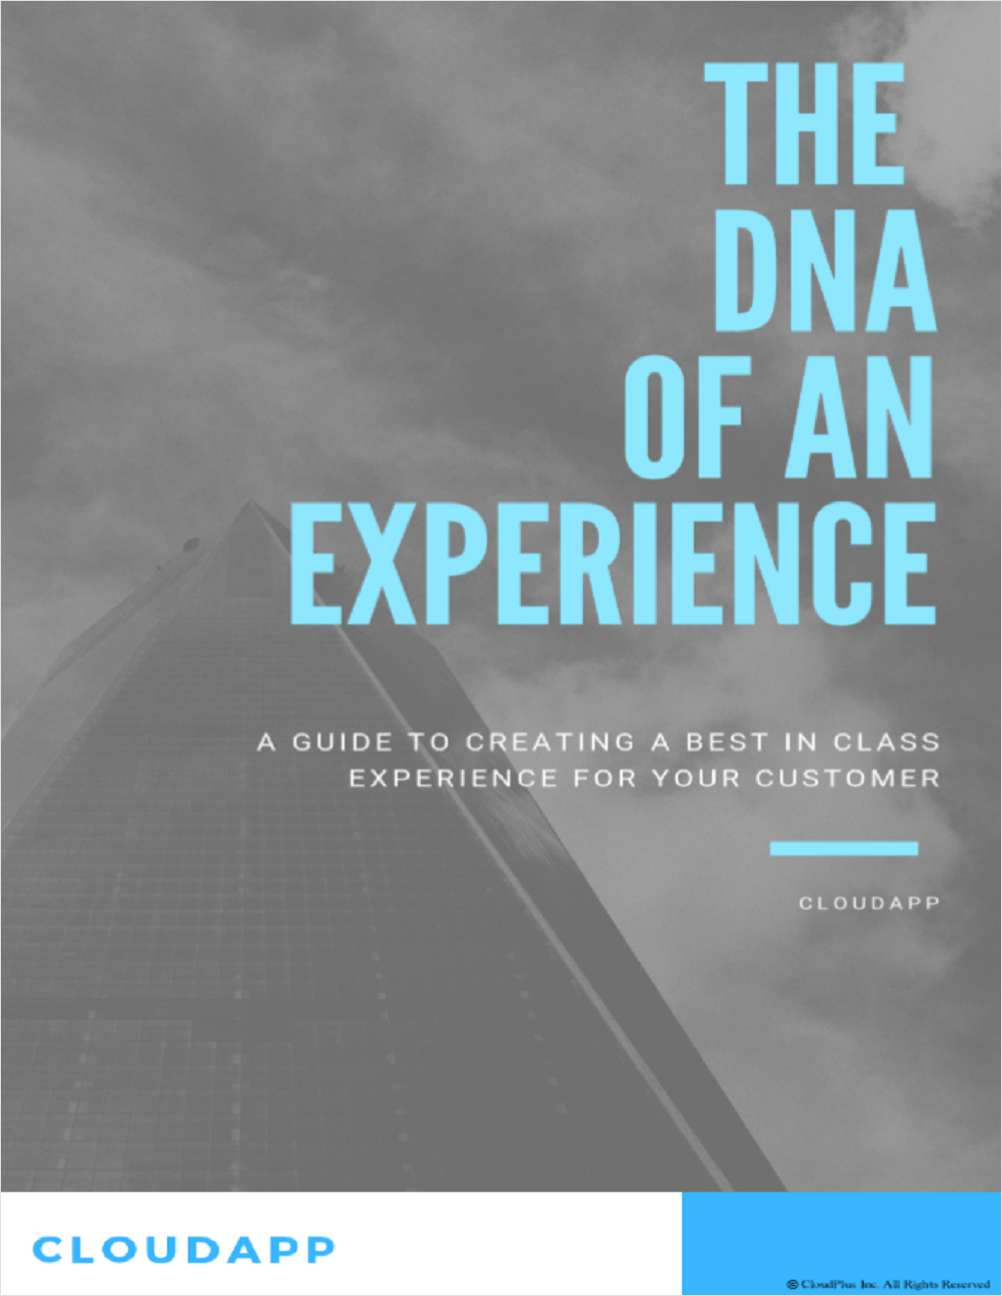 The DNA of an Experience